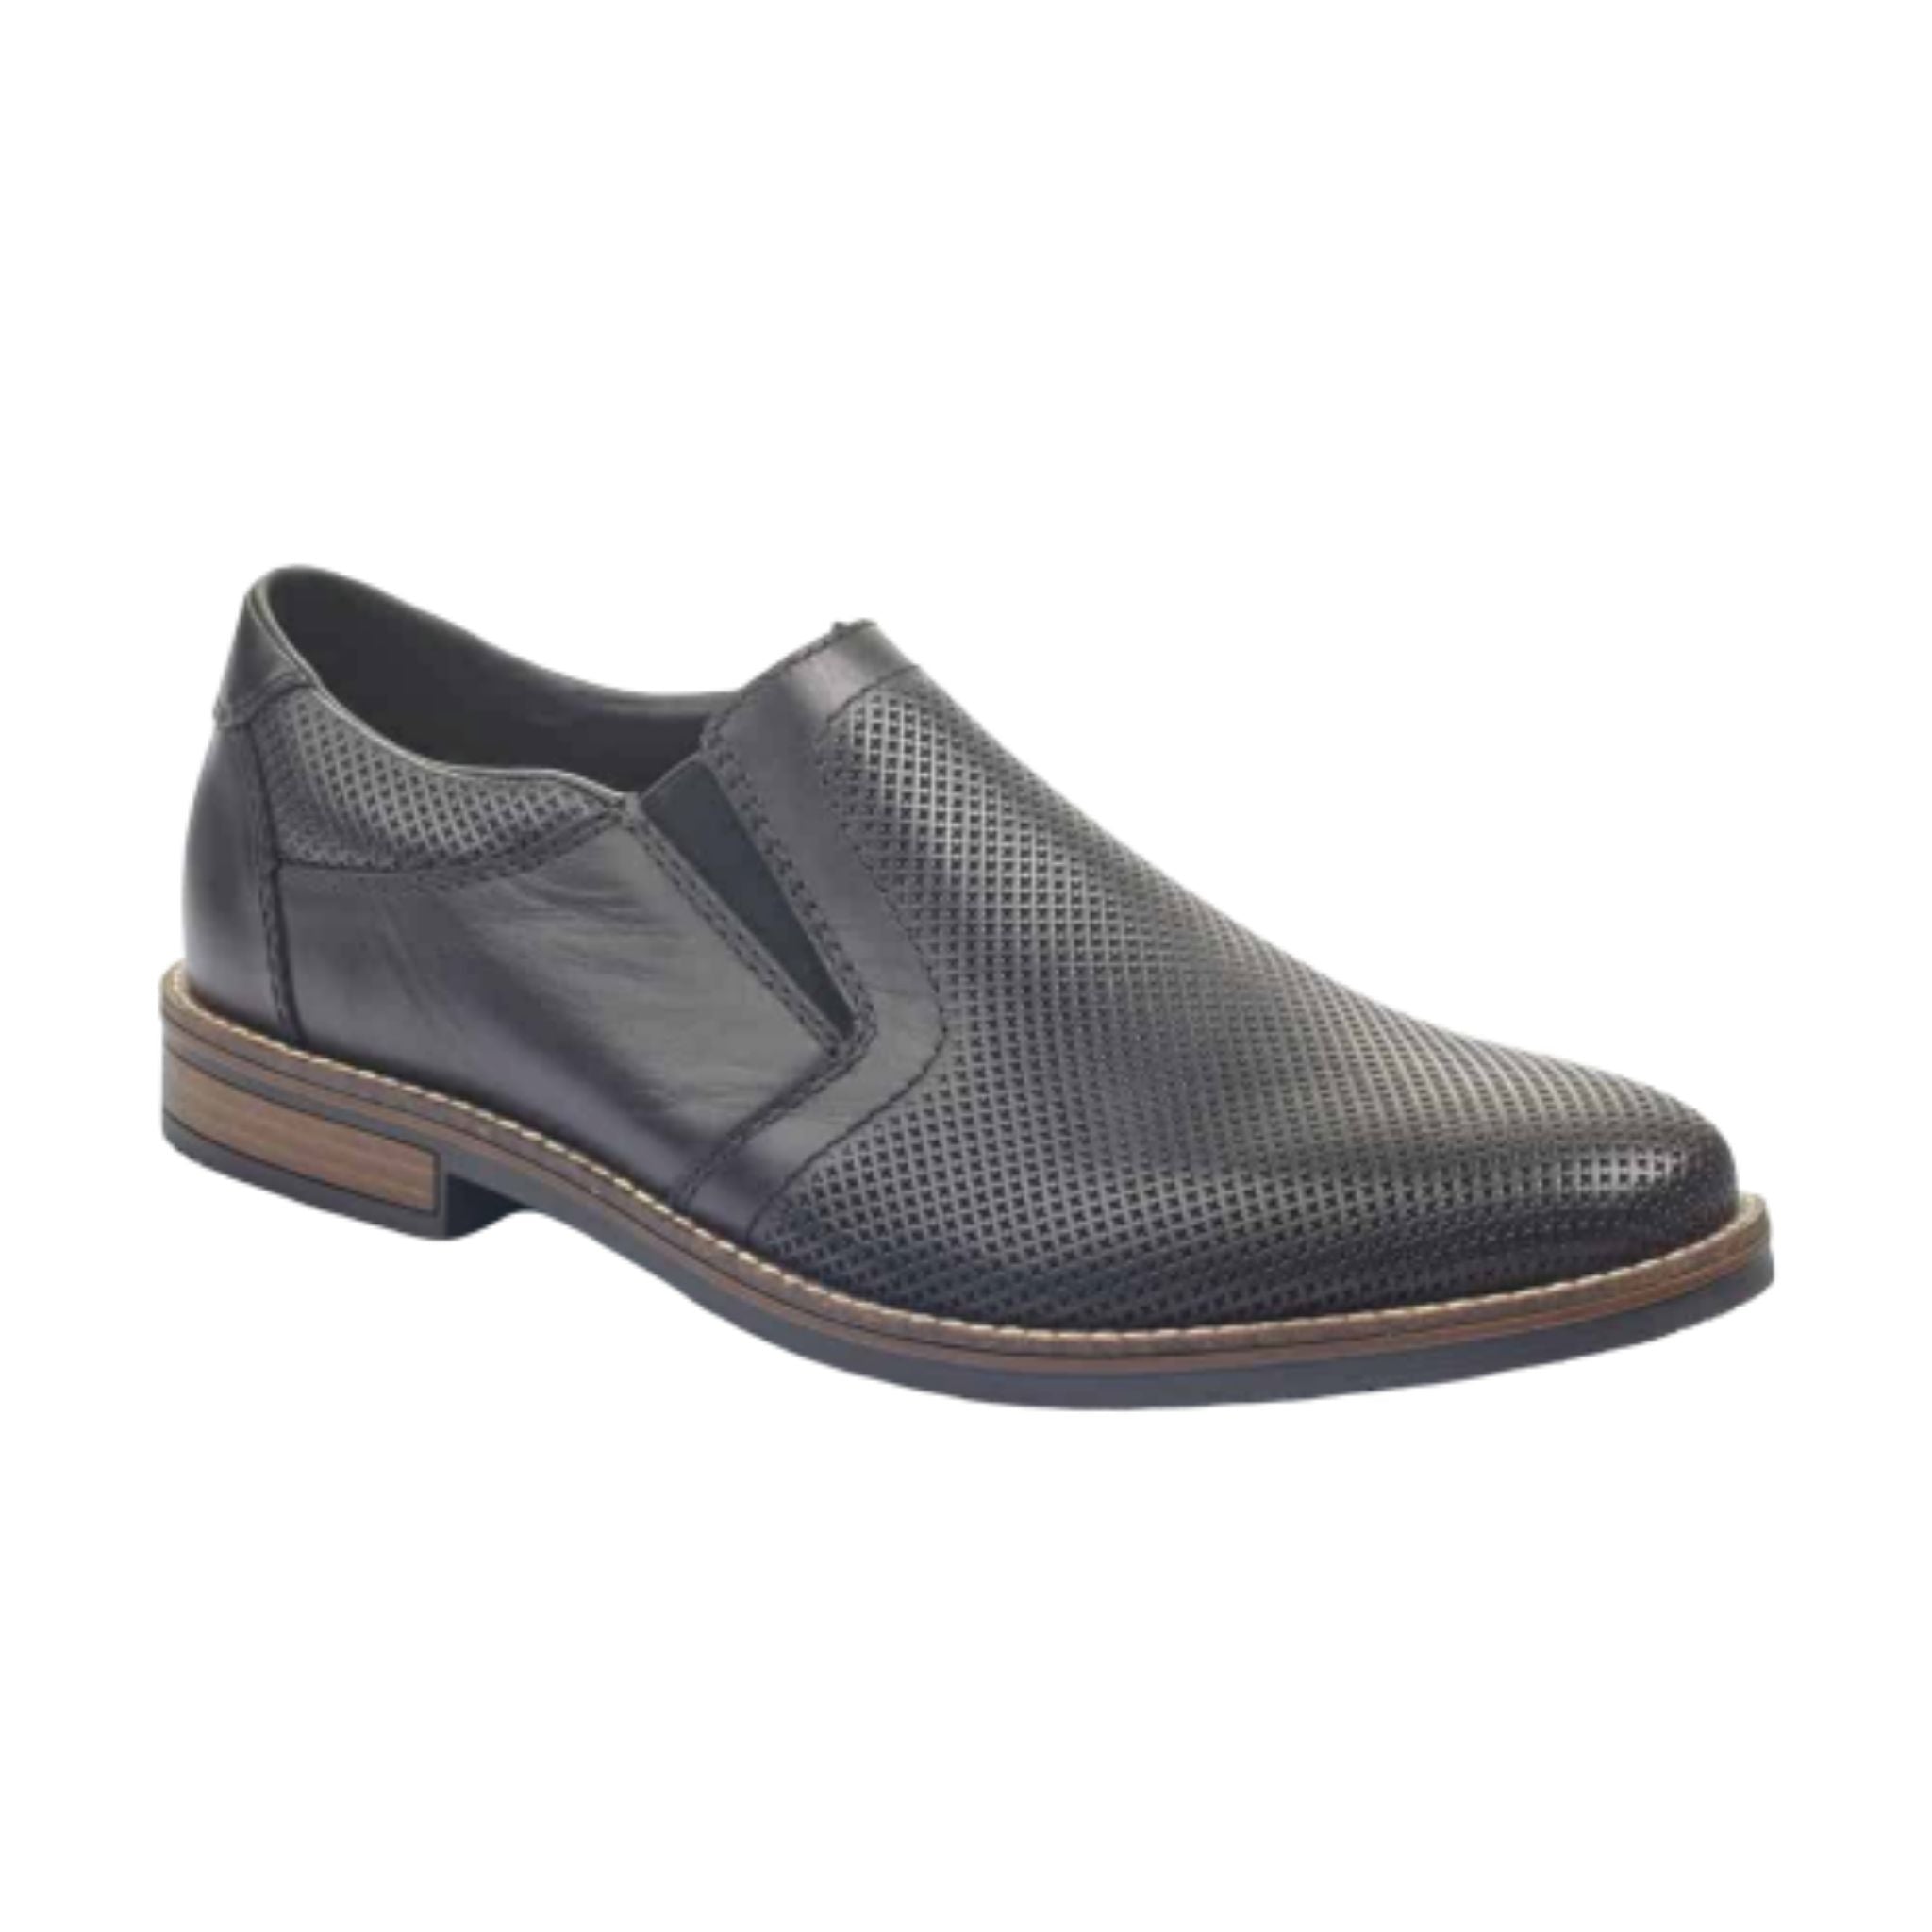 Men&#39;s black, semi-dress loafer with perforations. Made by Rieker.